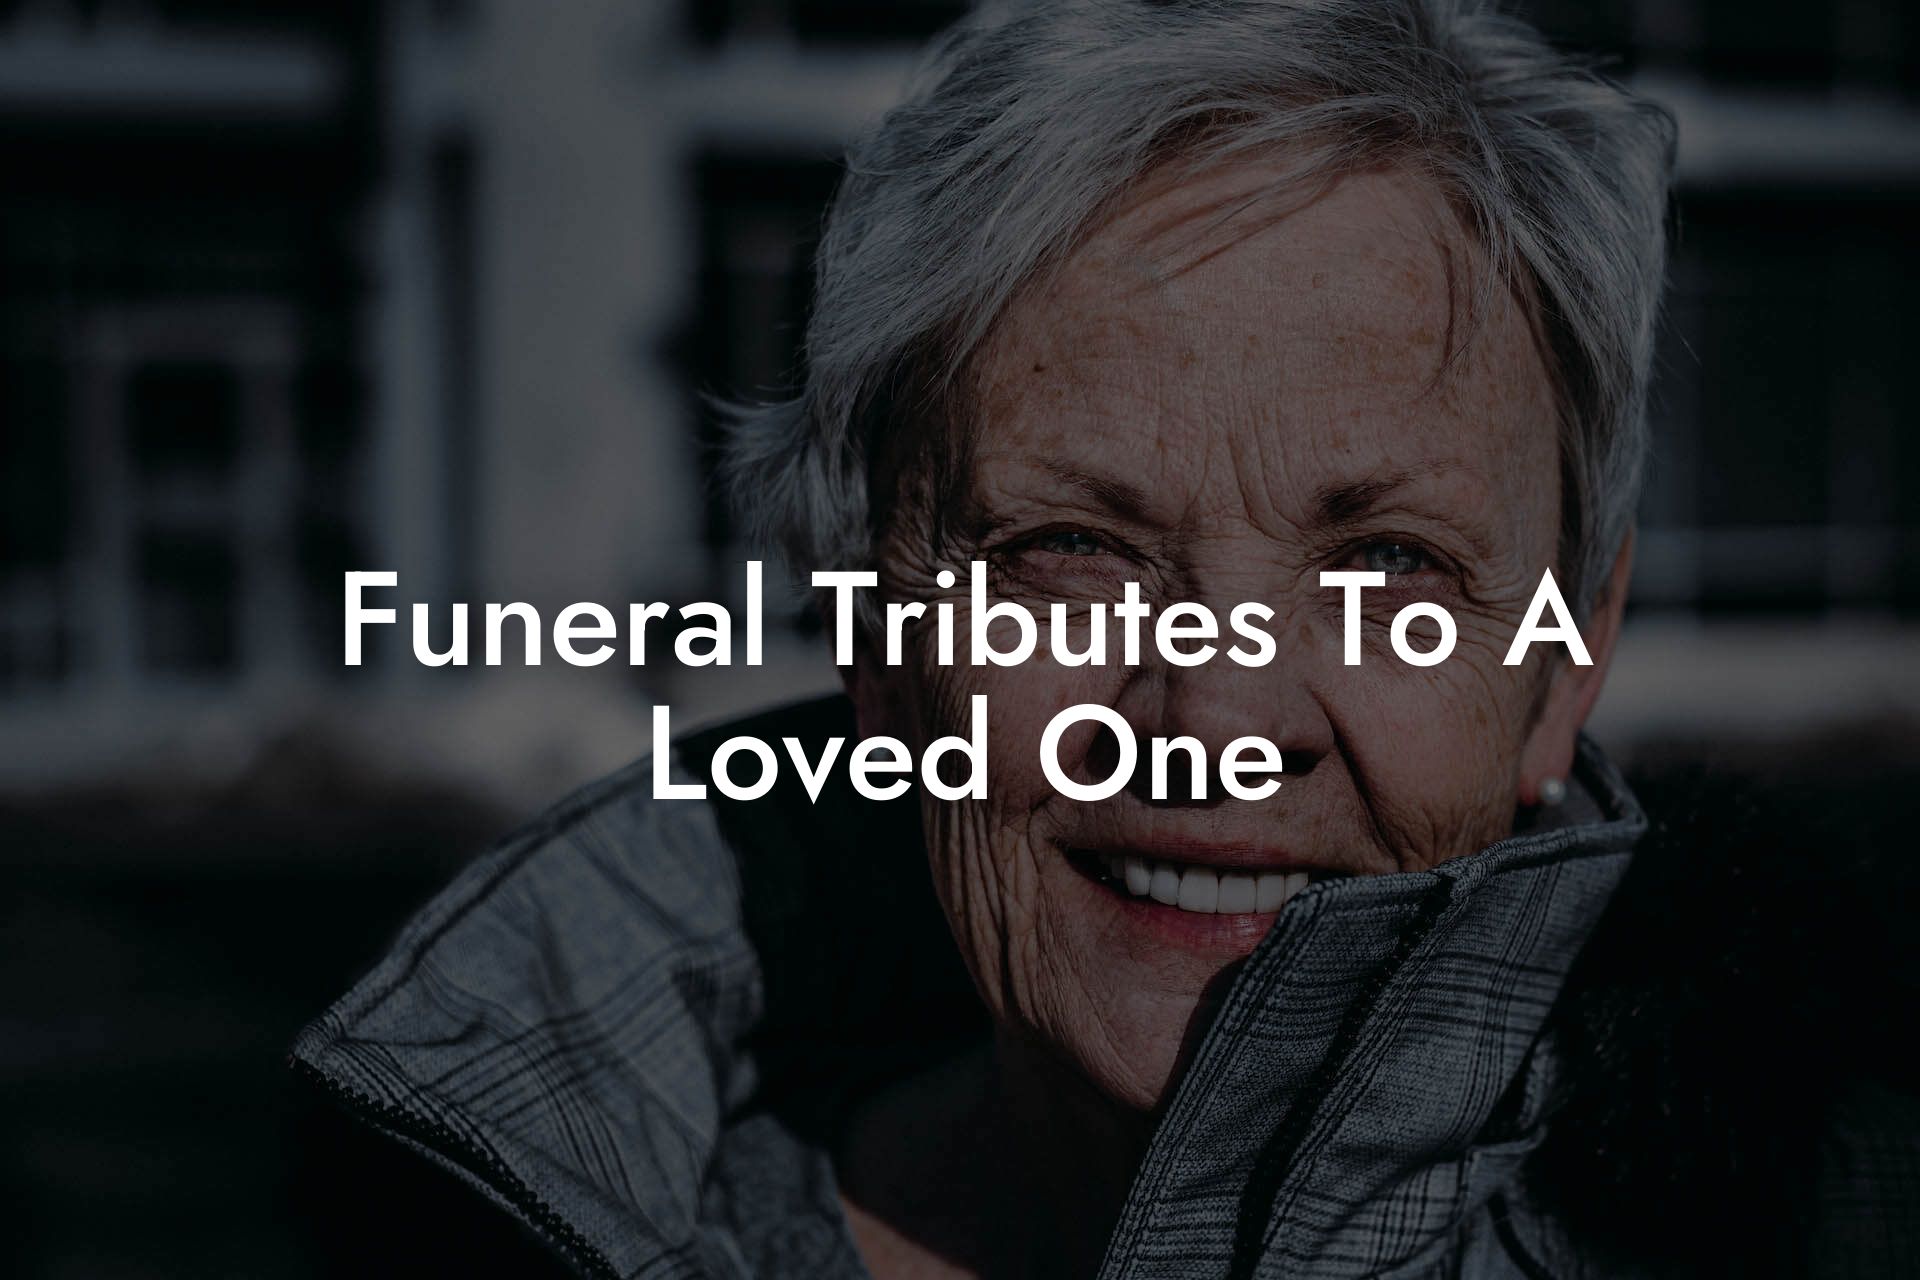 Funeral Tributes To A Loved One